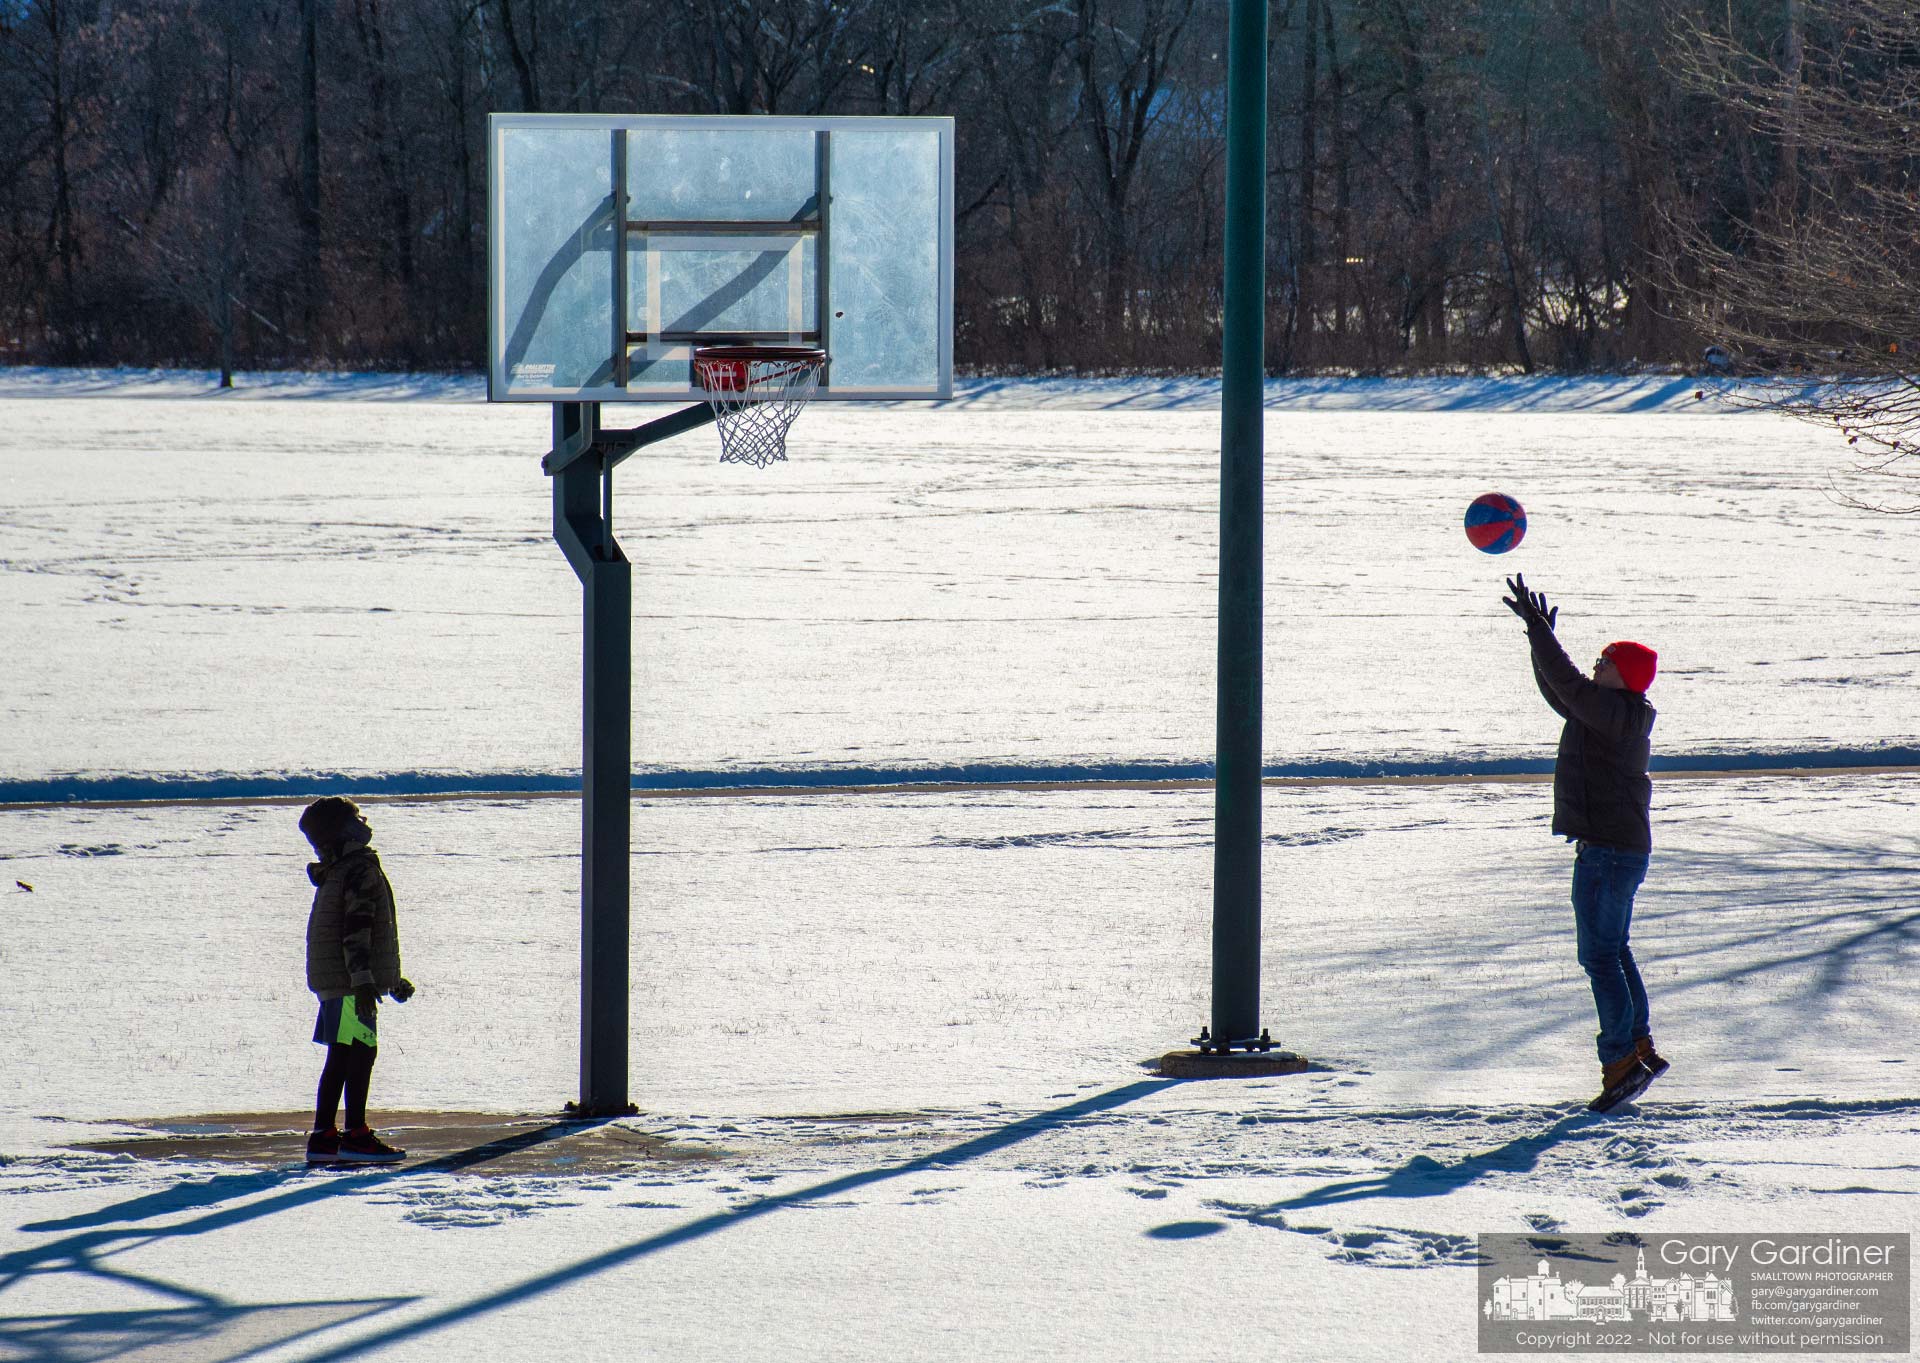 Father and son hold a shoot-around on the snow covering the basketball courts at the Westerville Sports Complex. My Final Photo for Jan. 19, 2022.